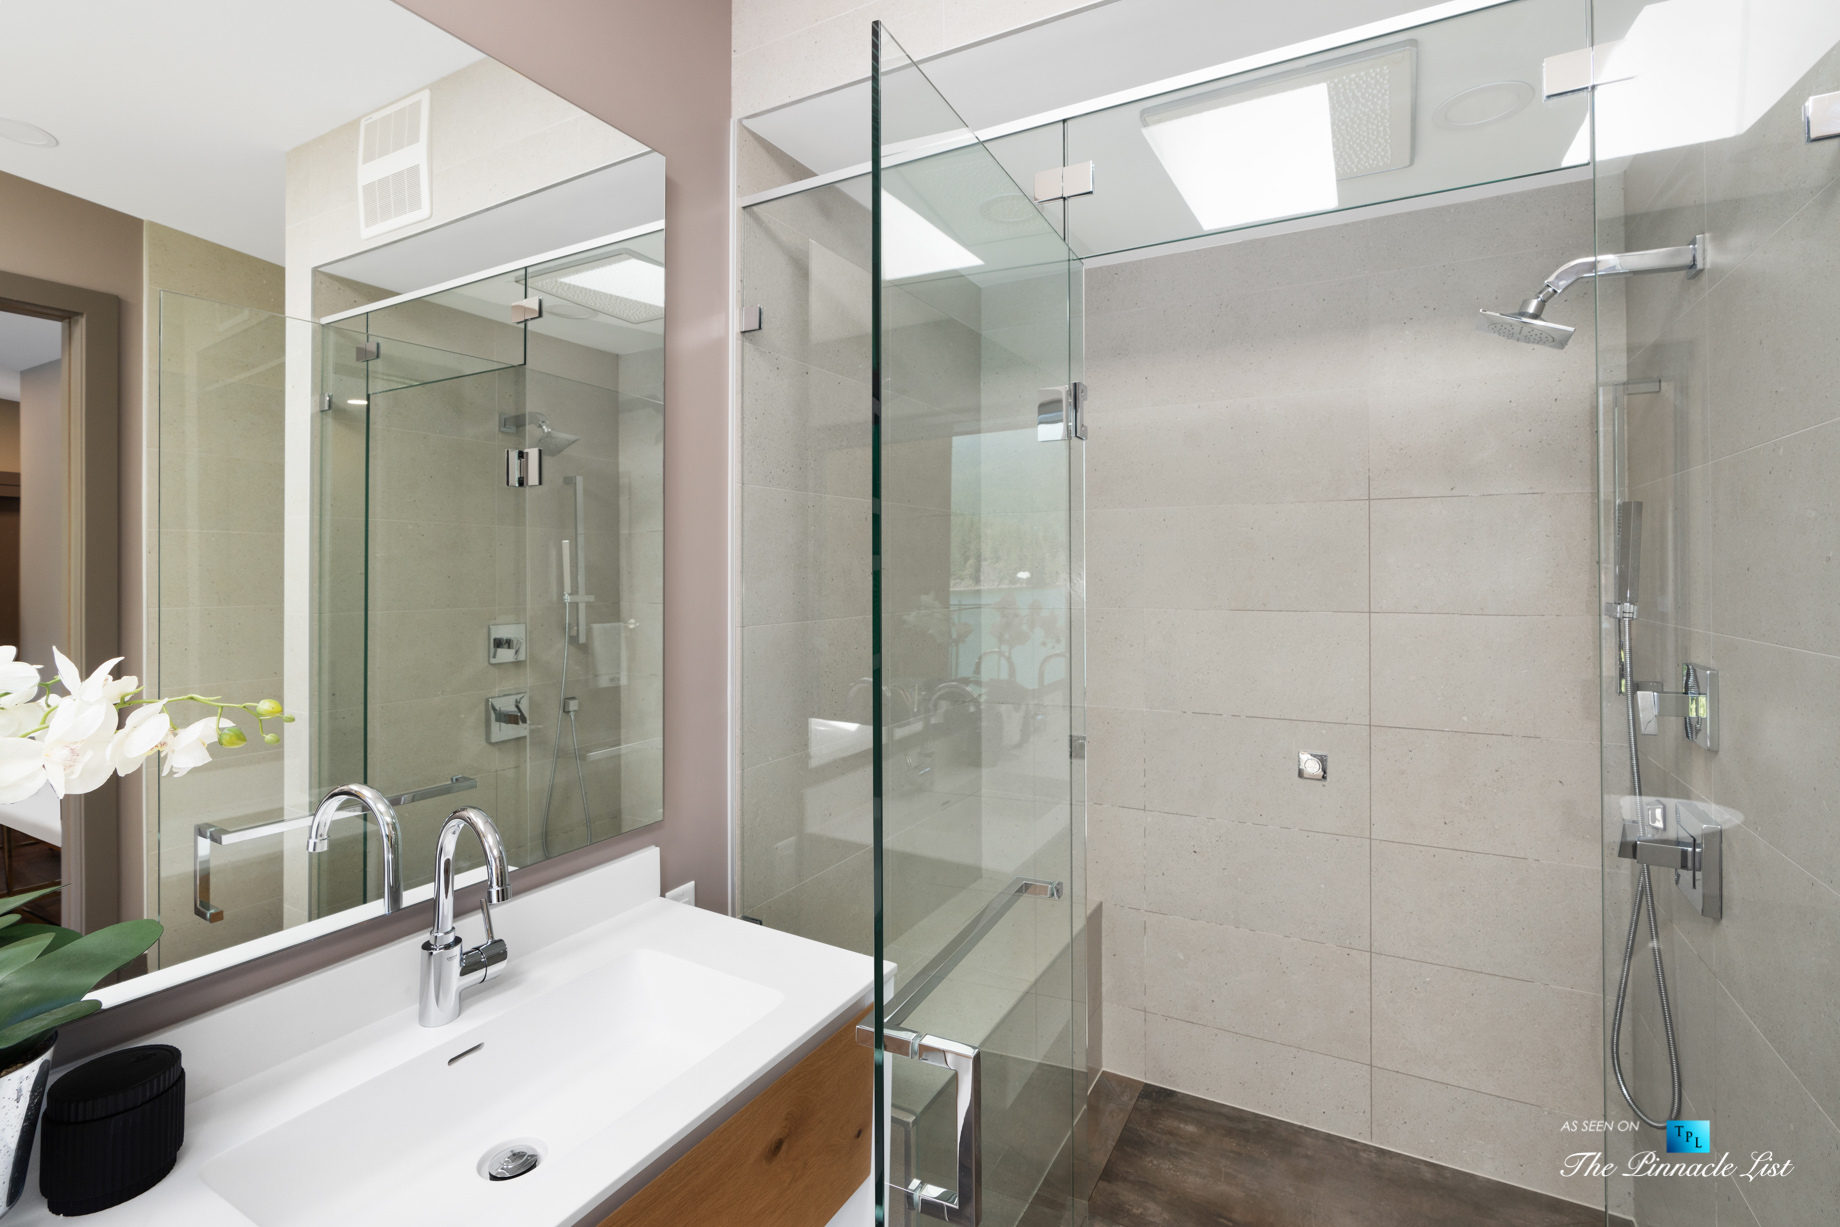 3350 Watson Rd, Belcarra, BC, Canada - Vancouver Luxury Real Estate - Modern Home Bathroom Shower